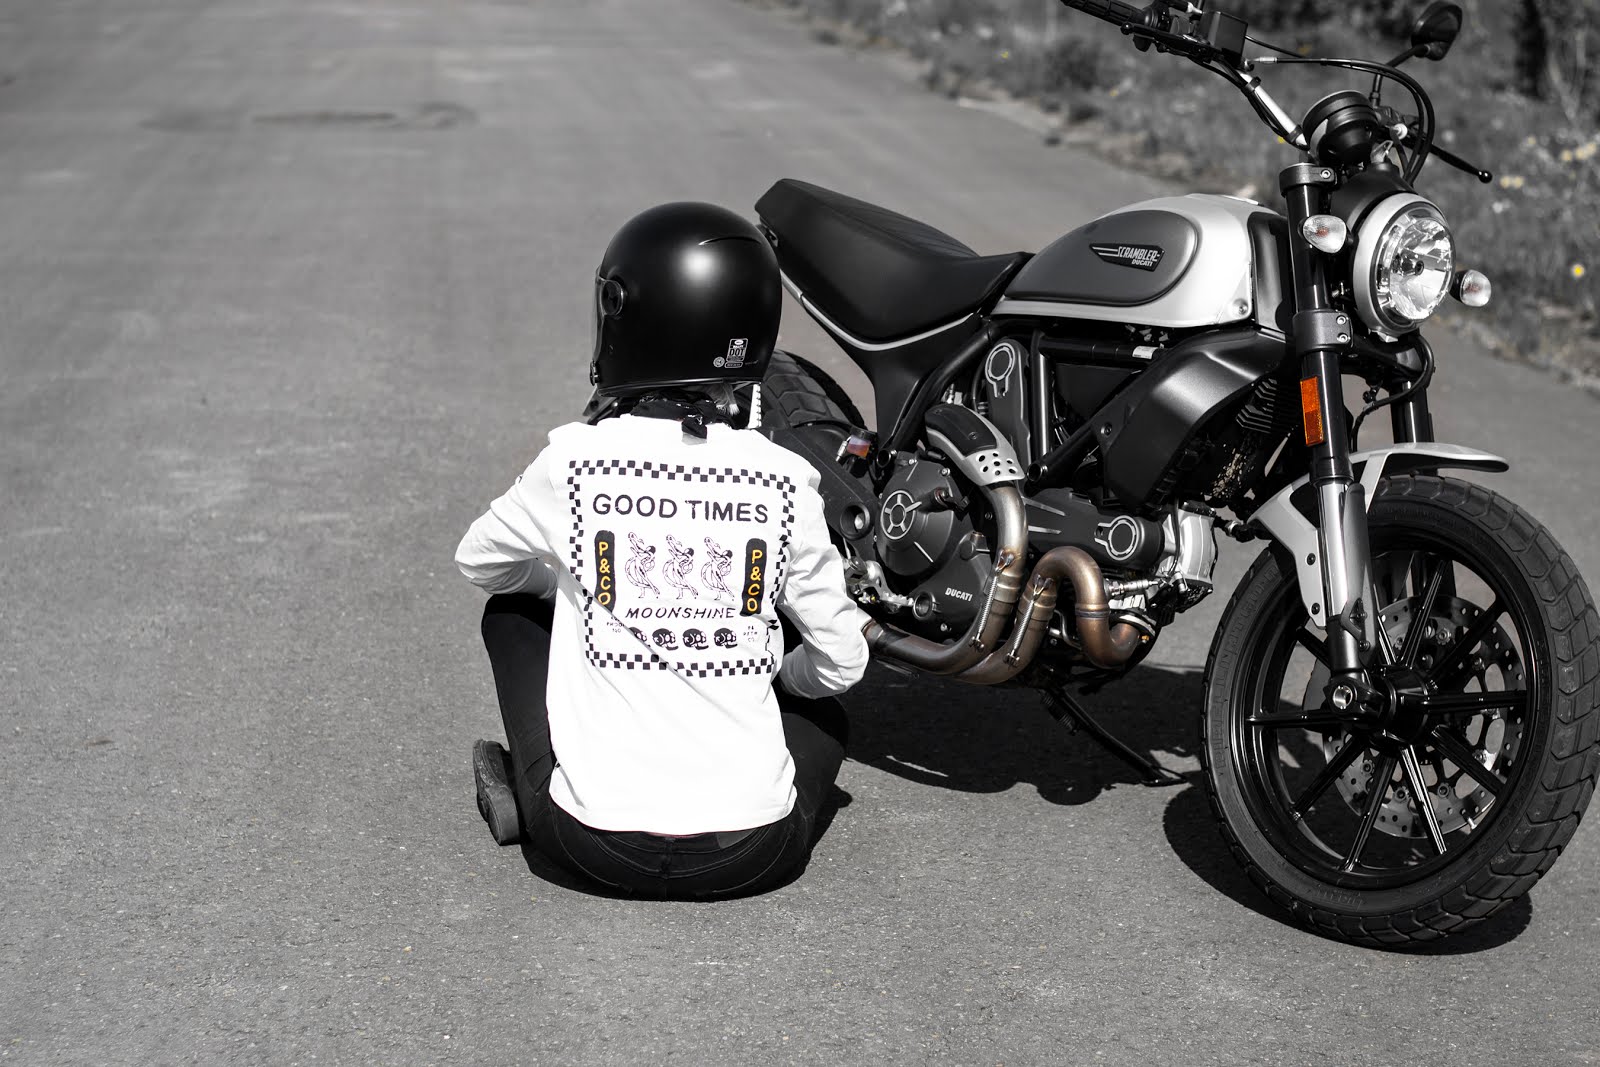 P&co, pandco, provision & co, one for the road collection, long sleeve, t-shirt, crew socks, scrambler ducati, motorcycle women, street style, outfit